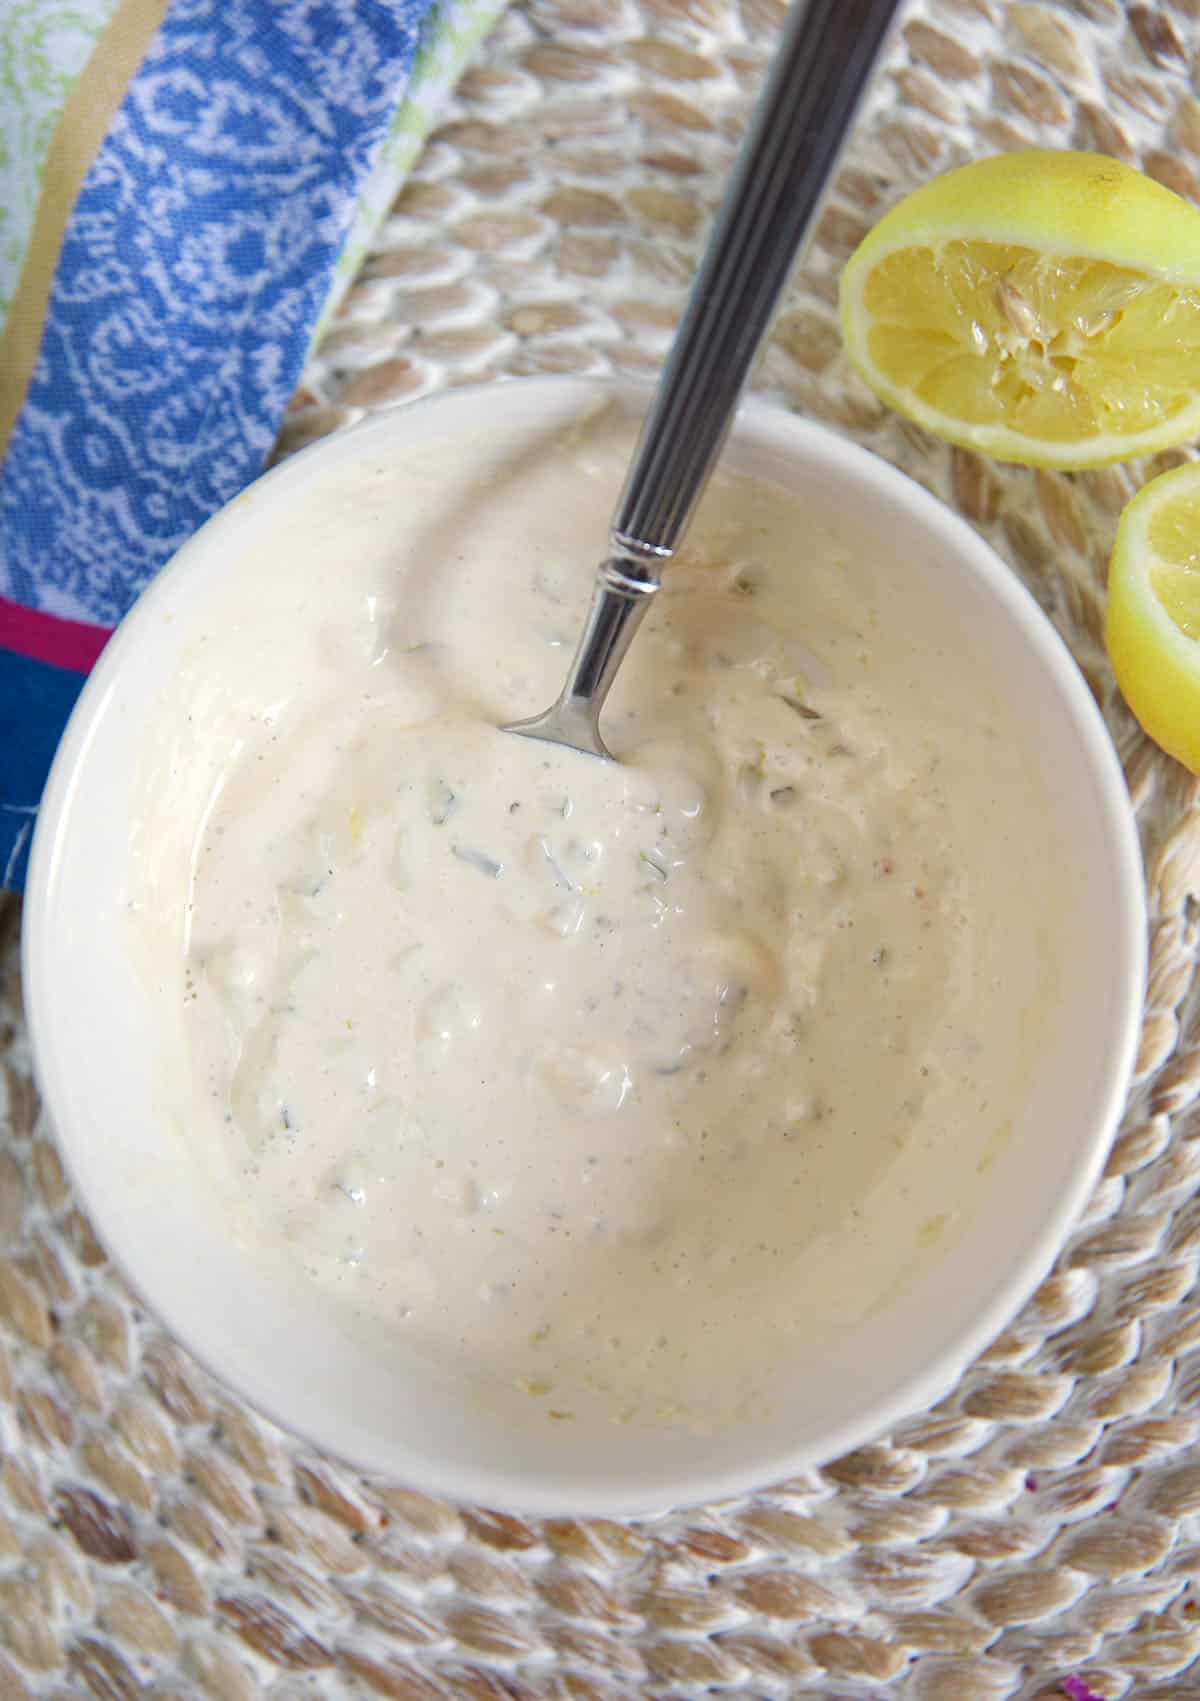 Tartar sauce has been mixed thoroughly in a white bowl. 